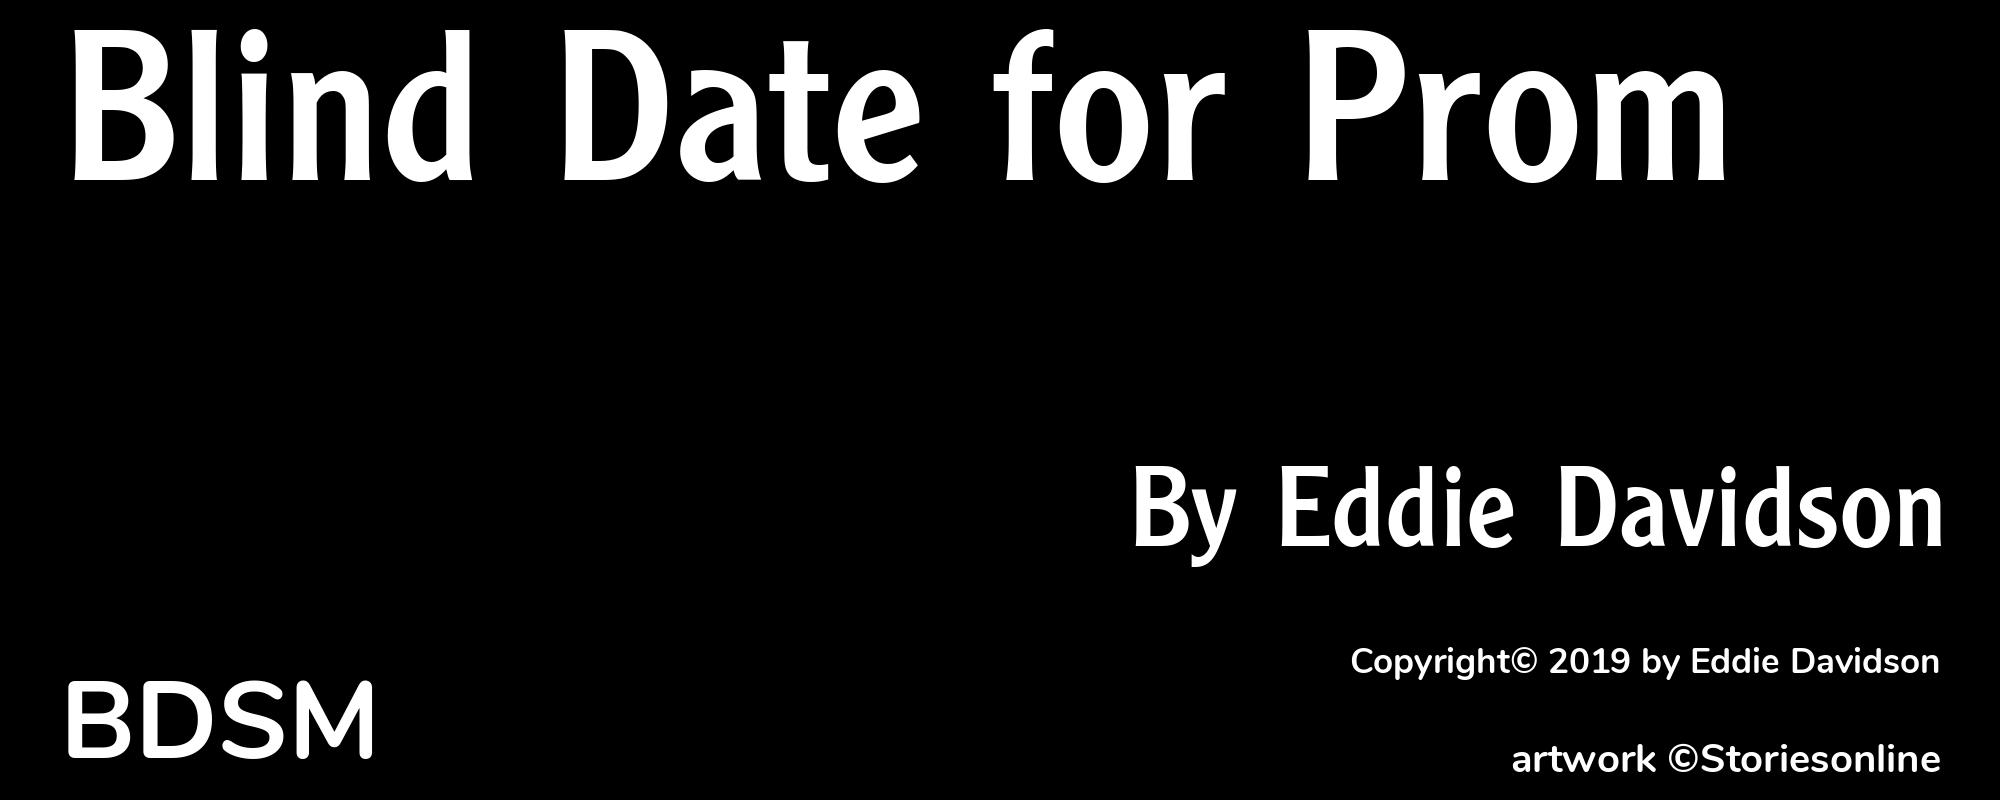 Blind Date for Prom - Cover